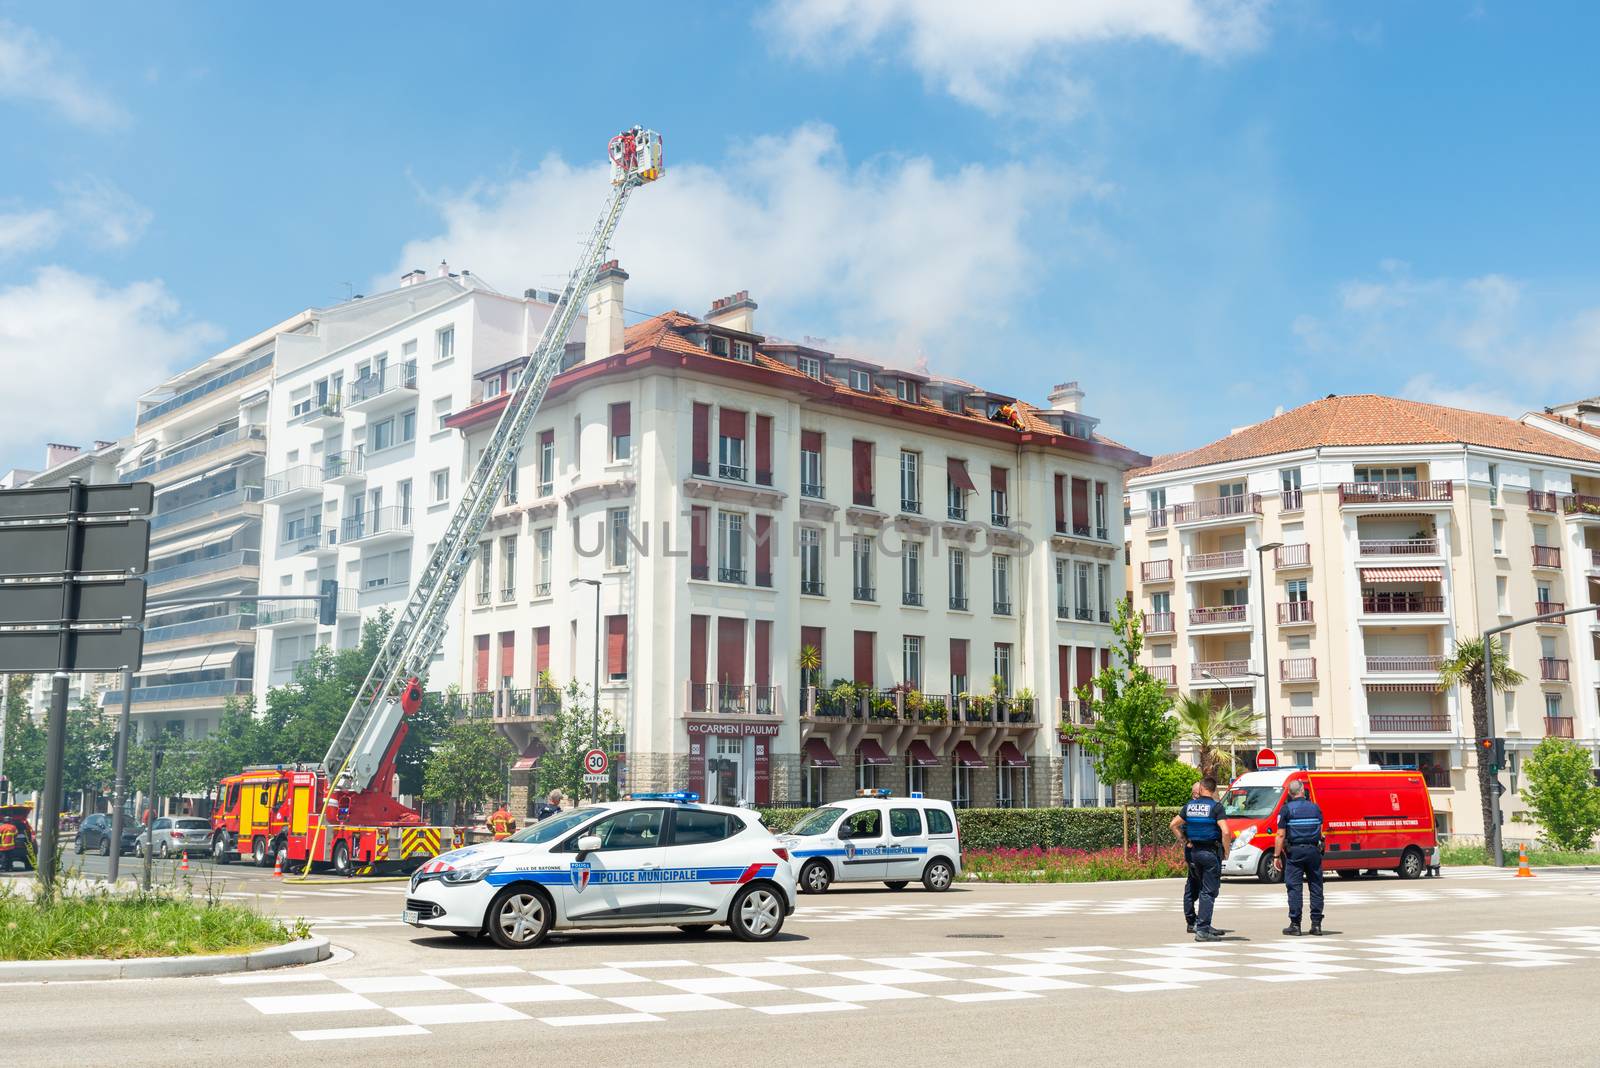 BAYONNE, FRANCE - 22 MAY, 2020: Firemen spray water to put out last floor apartment fire.